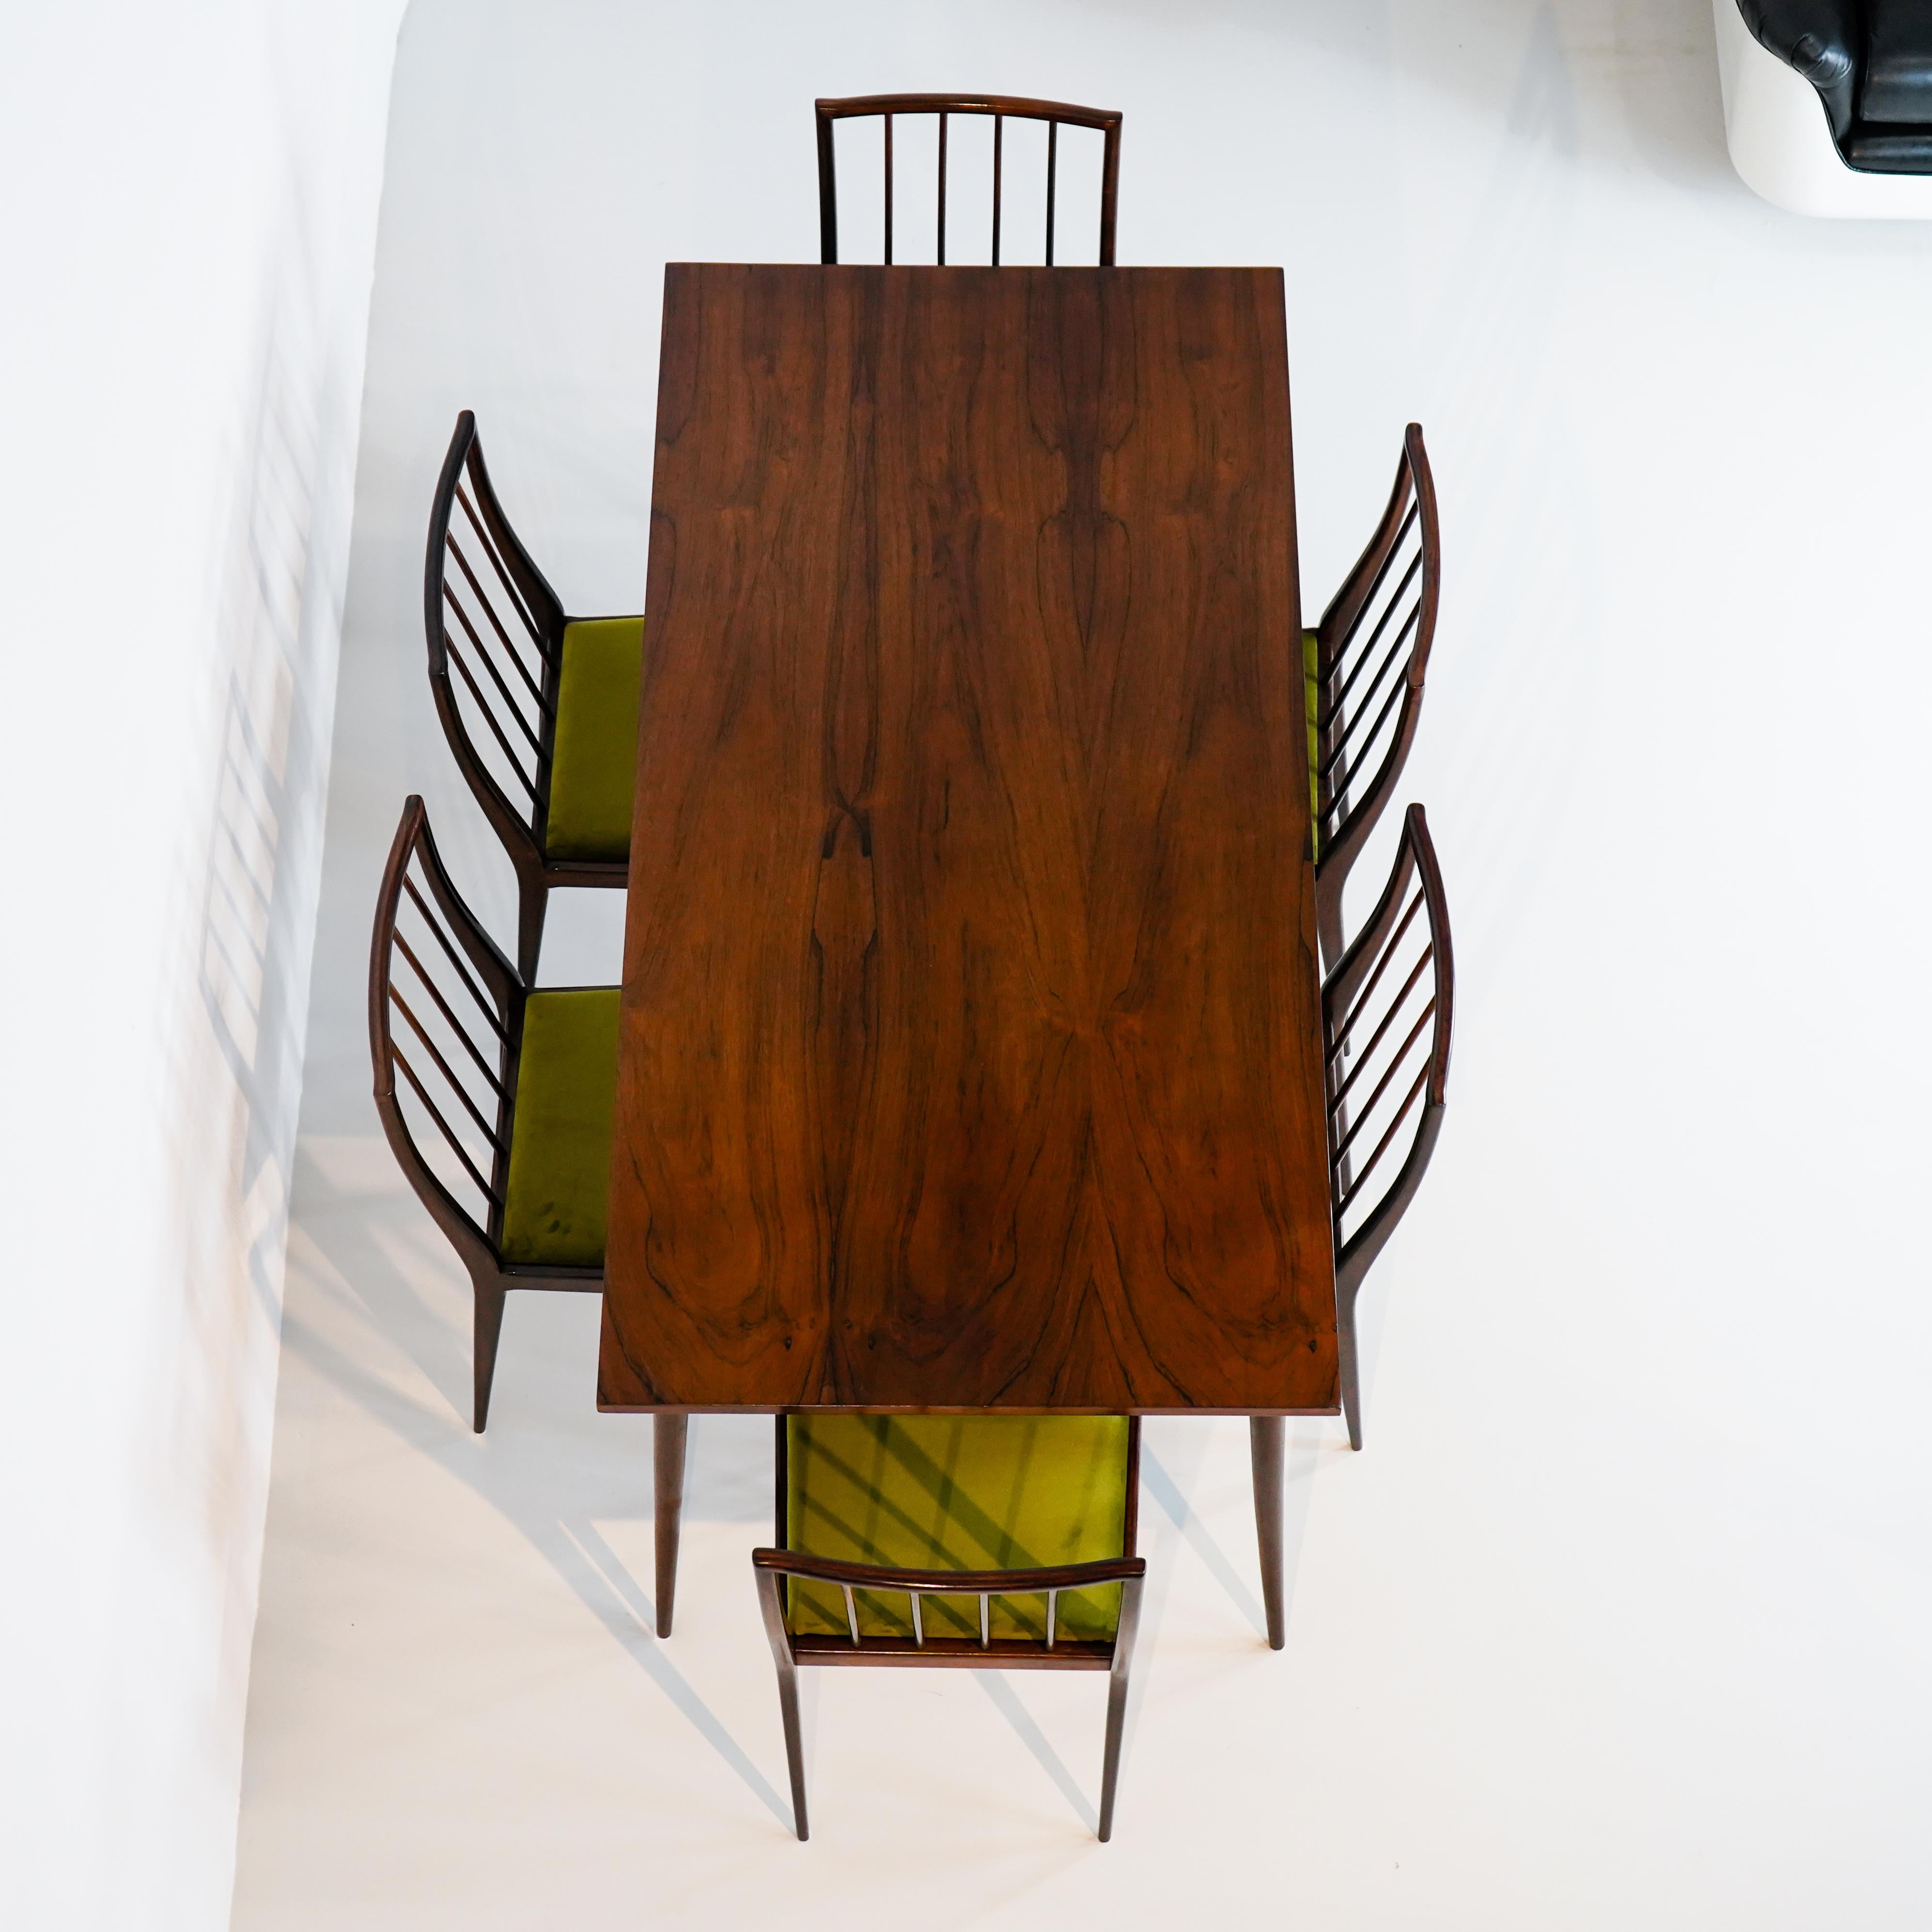 GB01 RIPAS - 6 chairs and sealed table in Rosewood, Geraldo de Barro Unilabor For Sale 4